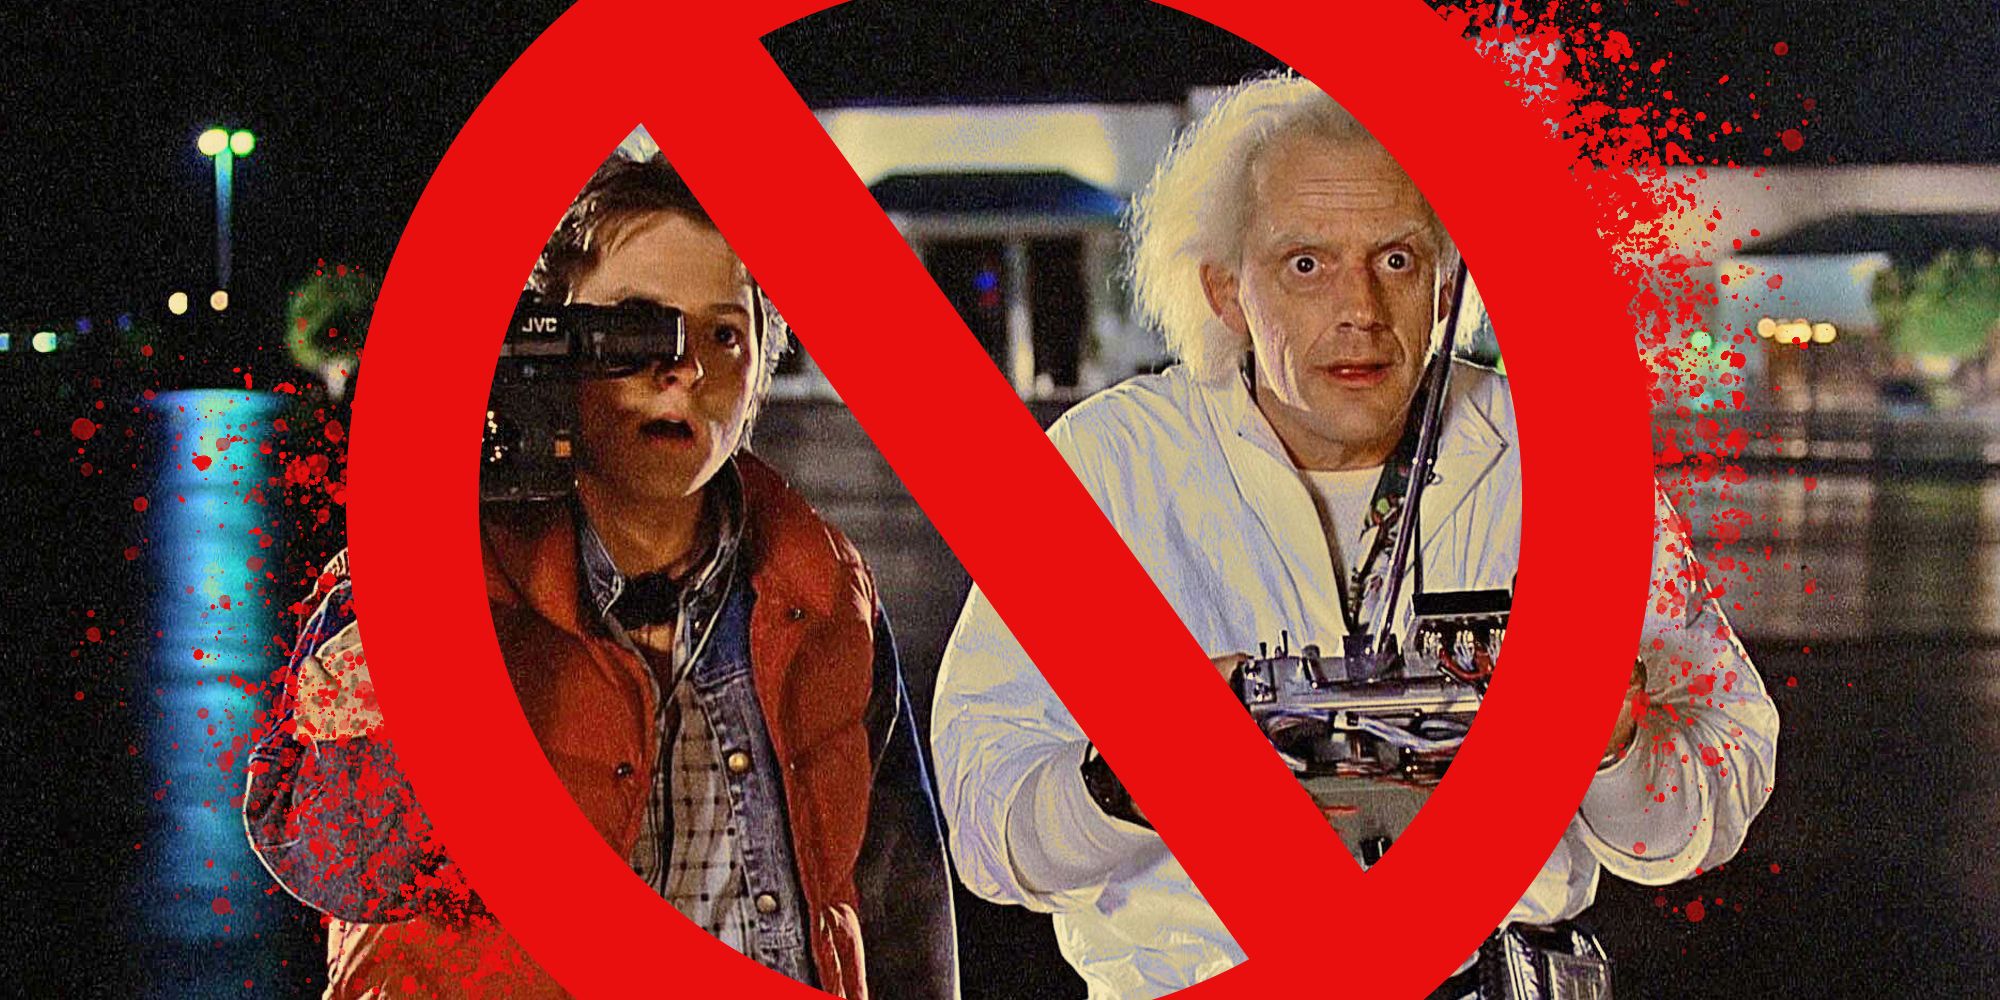 Why China Banned Back To The Future Feature Image With A Large No Symbol Over Marty McFly and Doc Brown